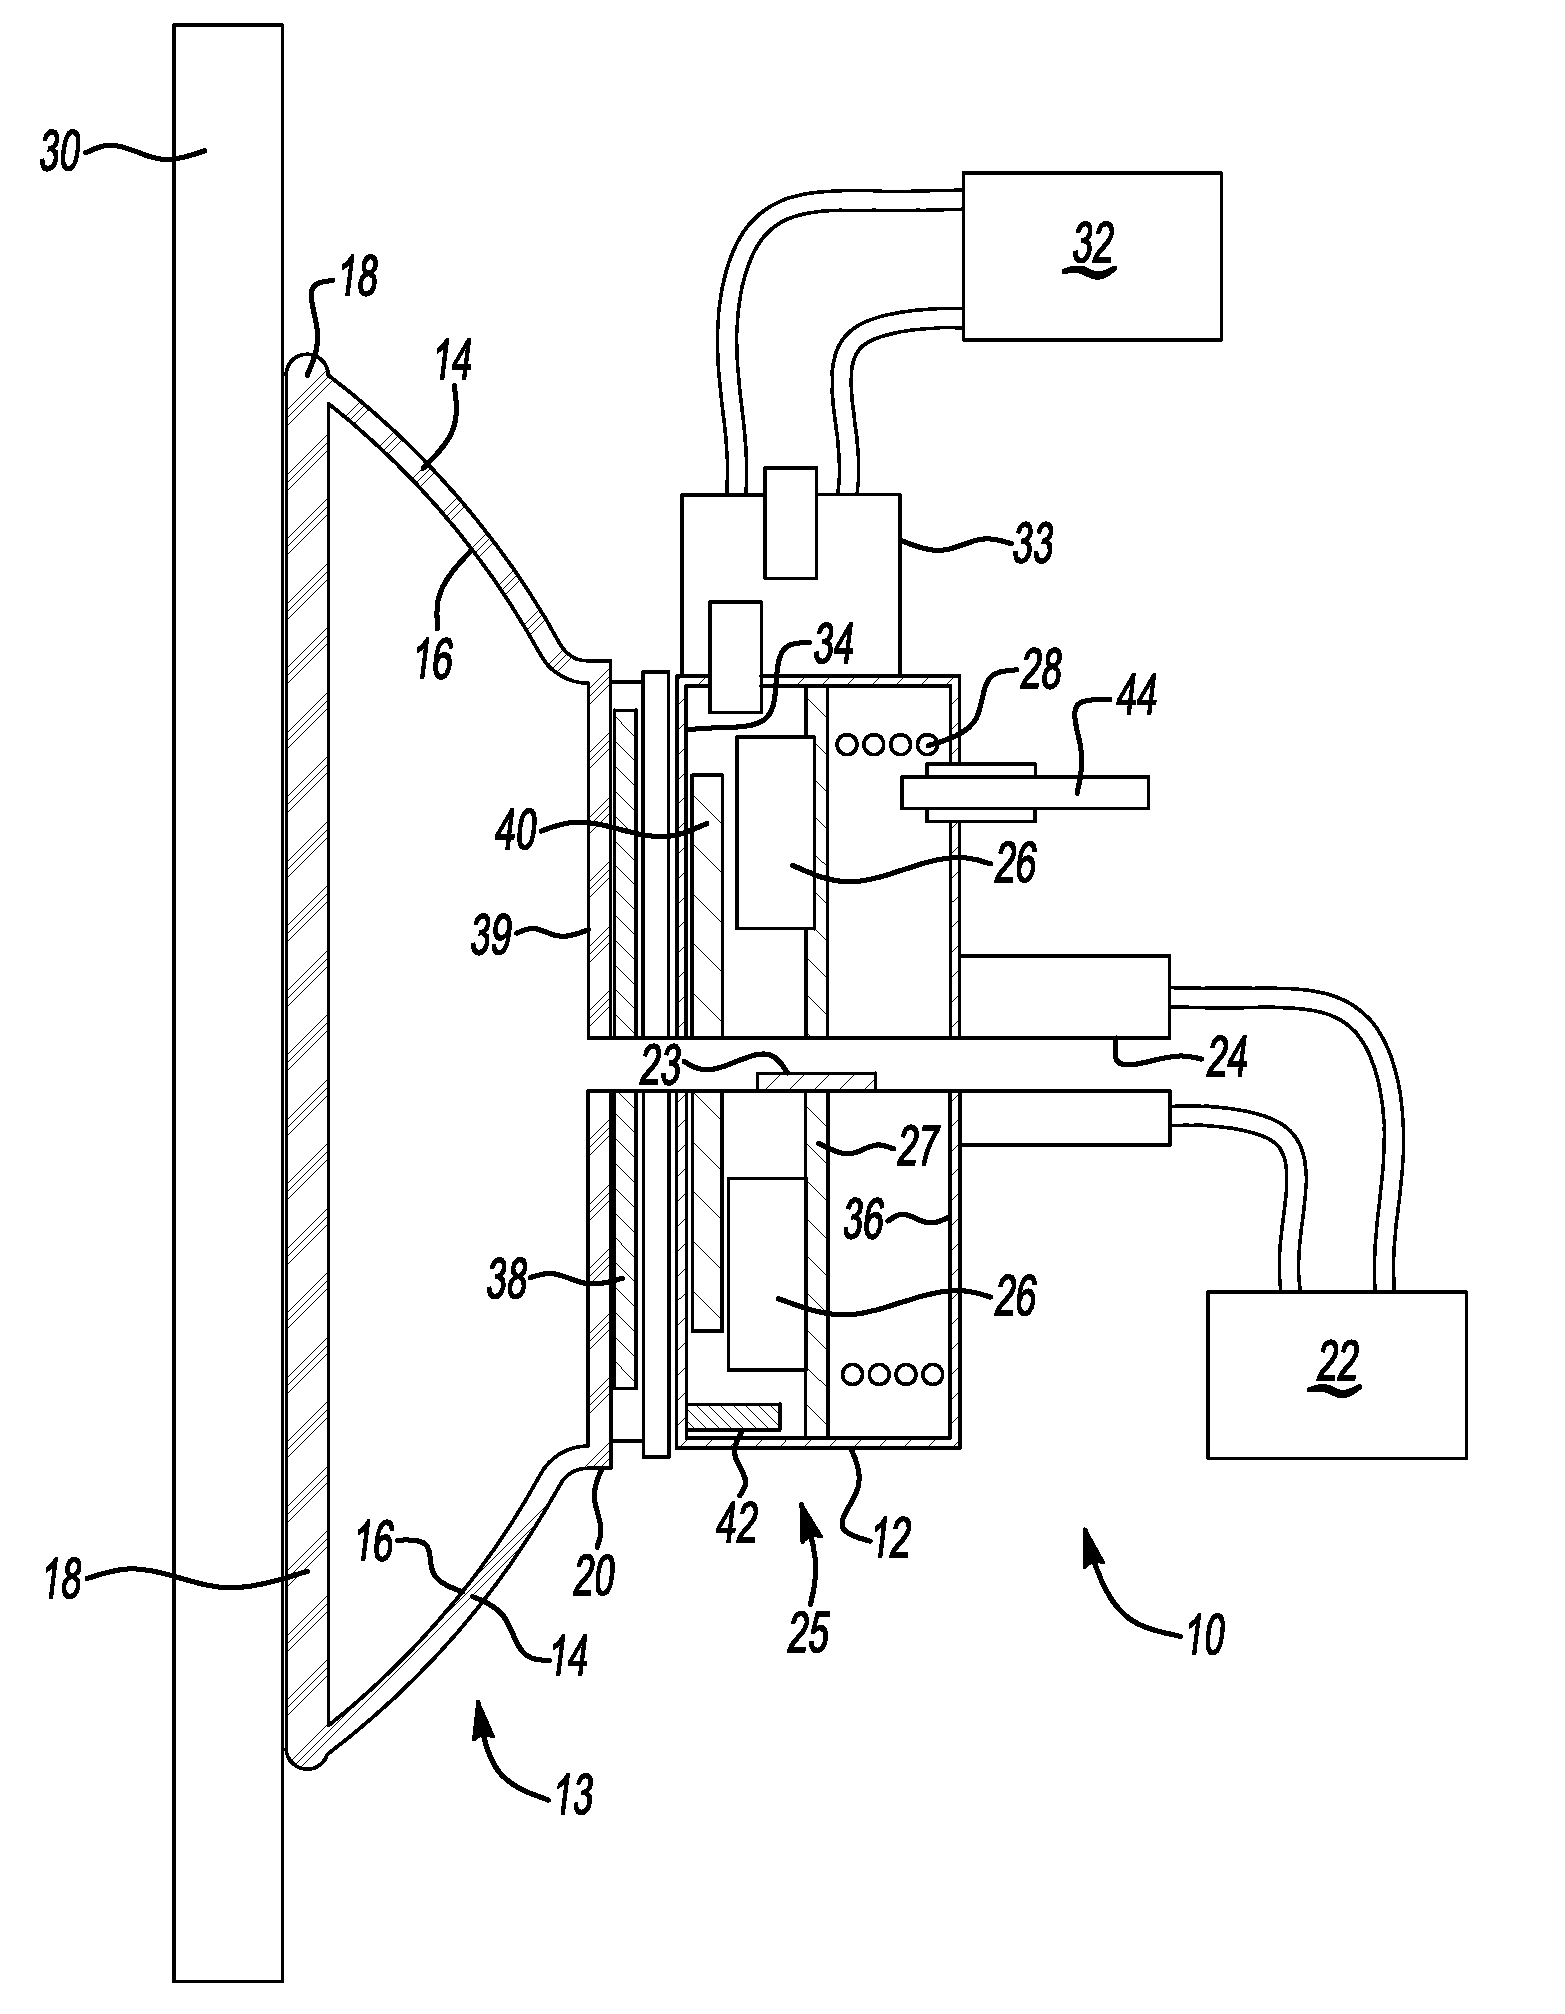 Integrated vacuum gripper with internal releasable magnet and method of using same